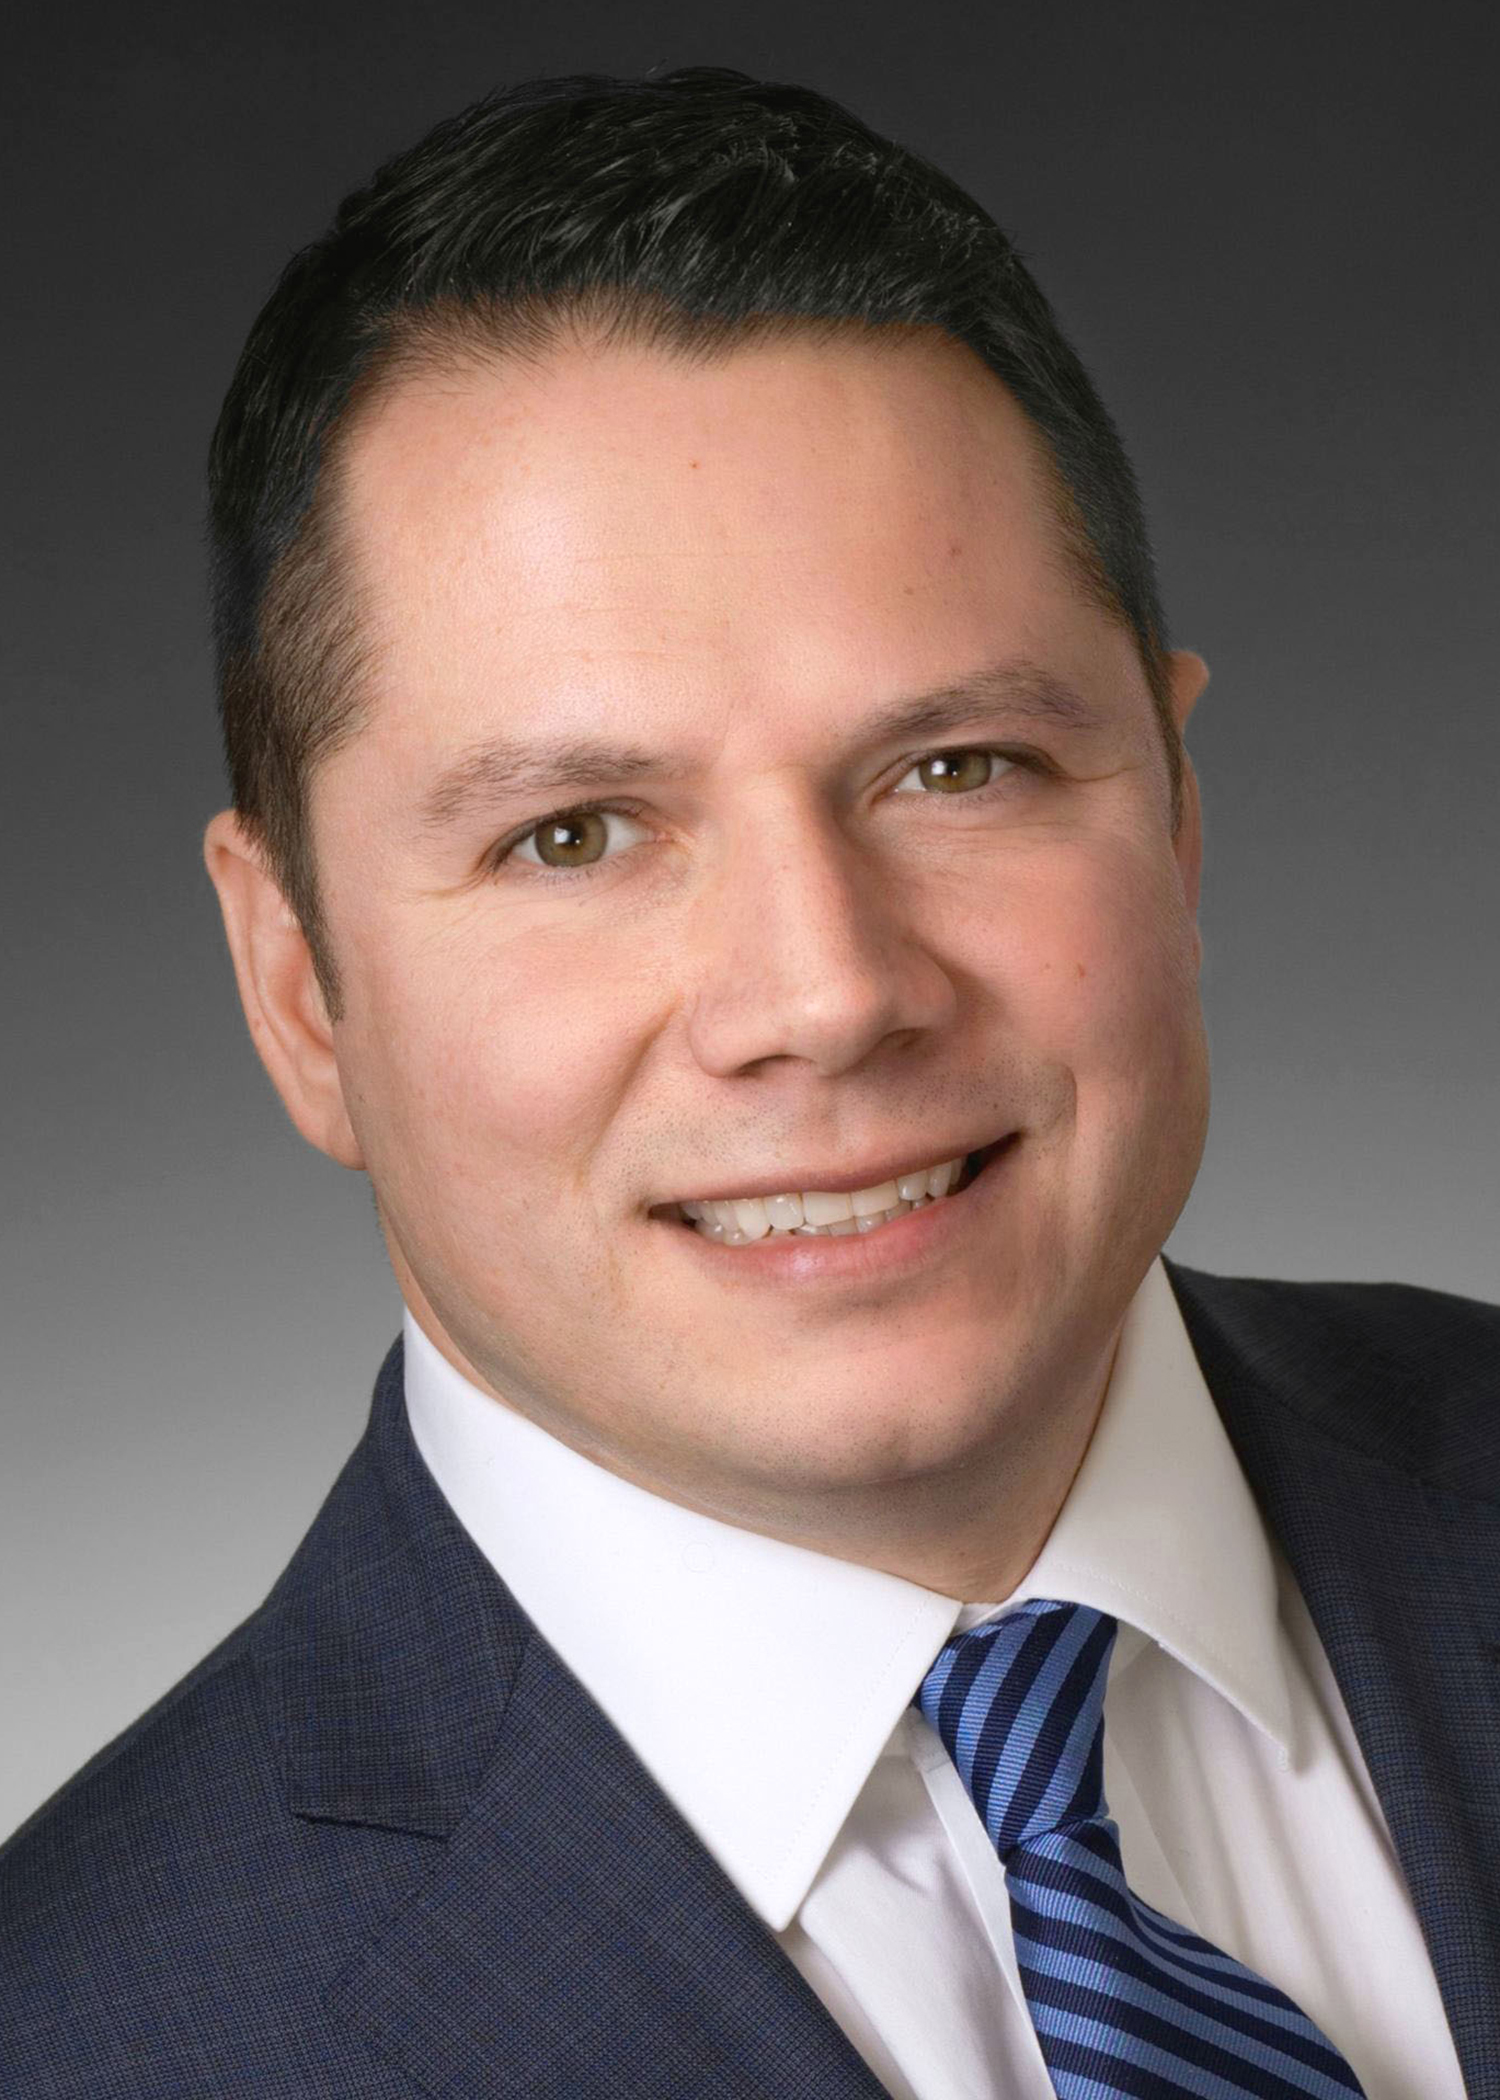 RJ Nicolli, Jr. was hired as a private client advisor for Wilmington Trust's Wealth Advisory in the Central and Southern New York regions.